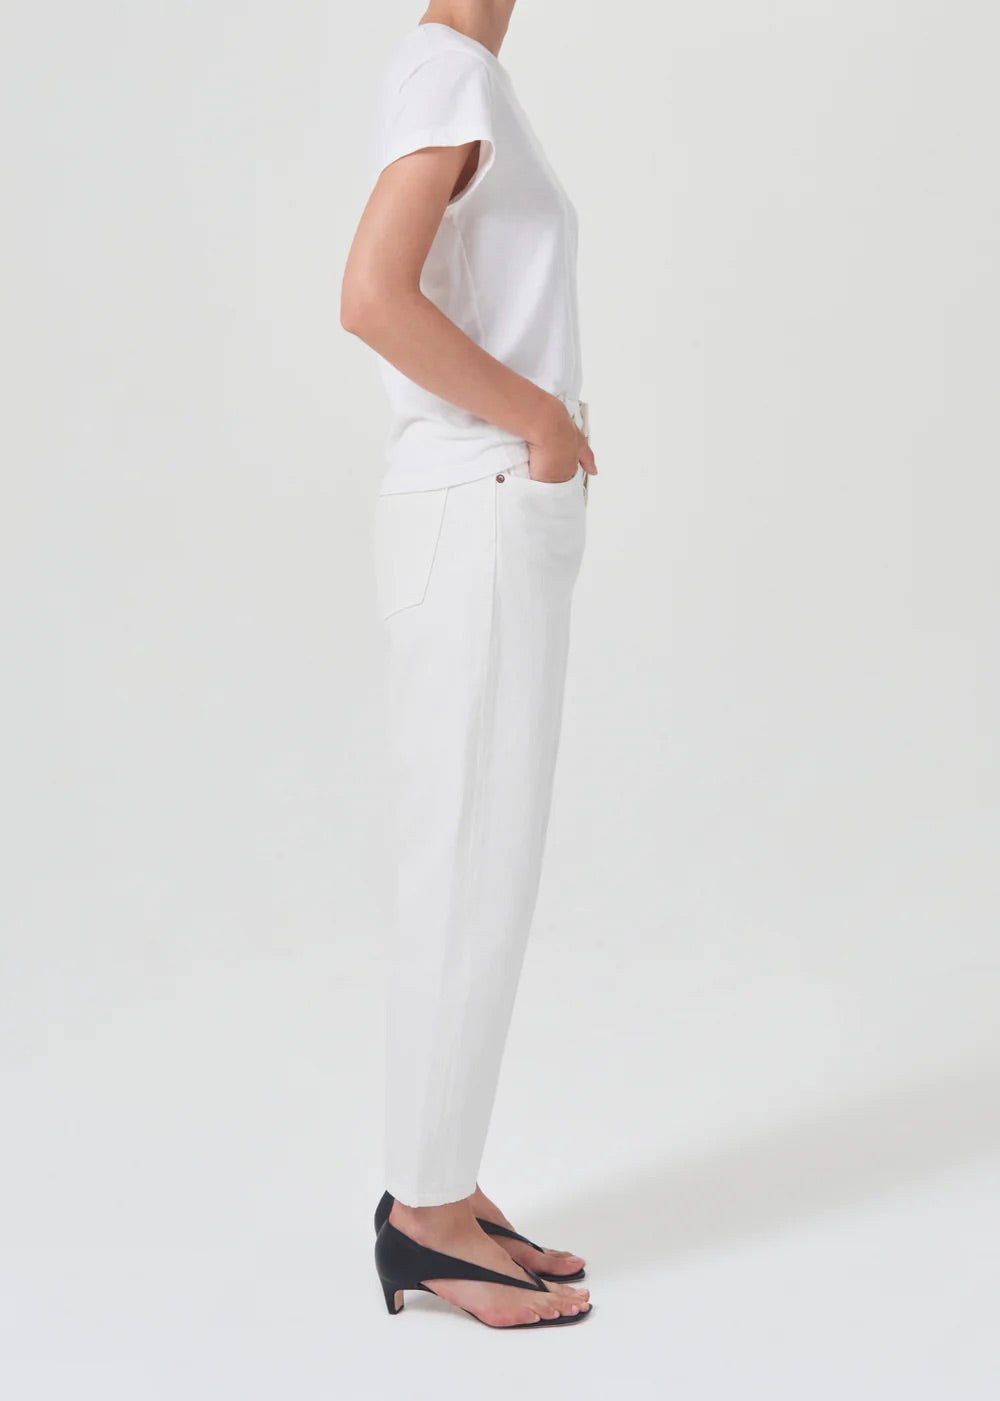 A woman wearing the AGOLDE 90's Straight Crop - Salt white pants.